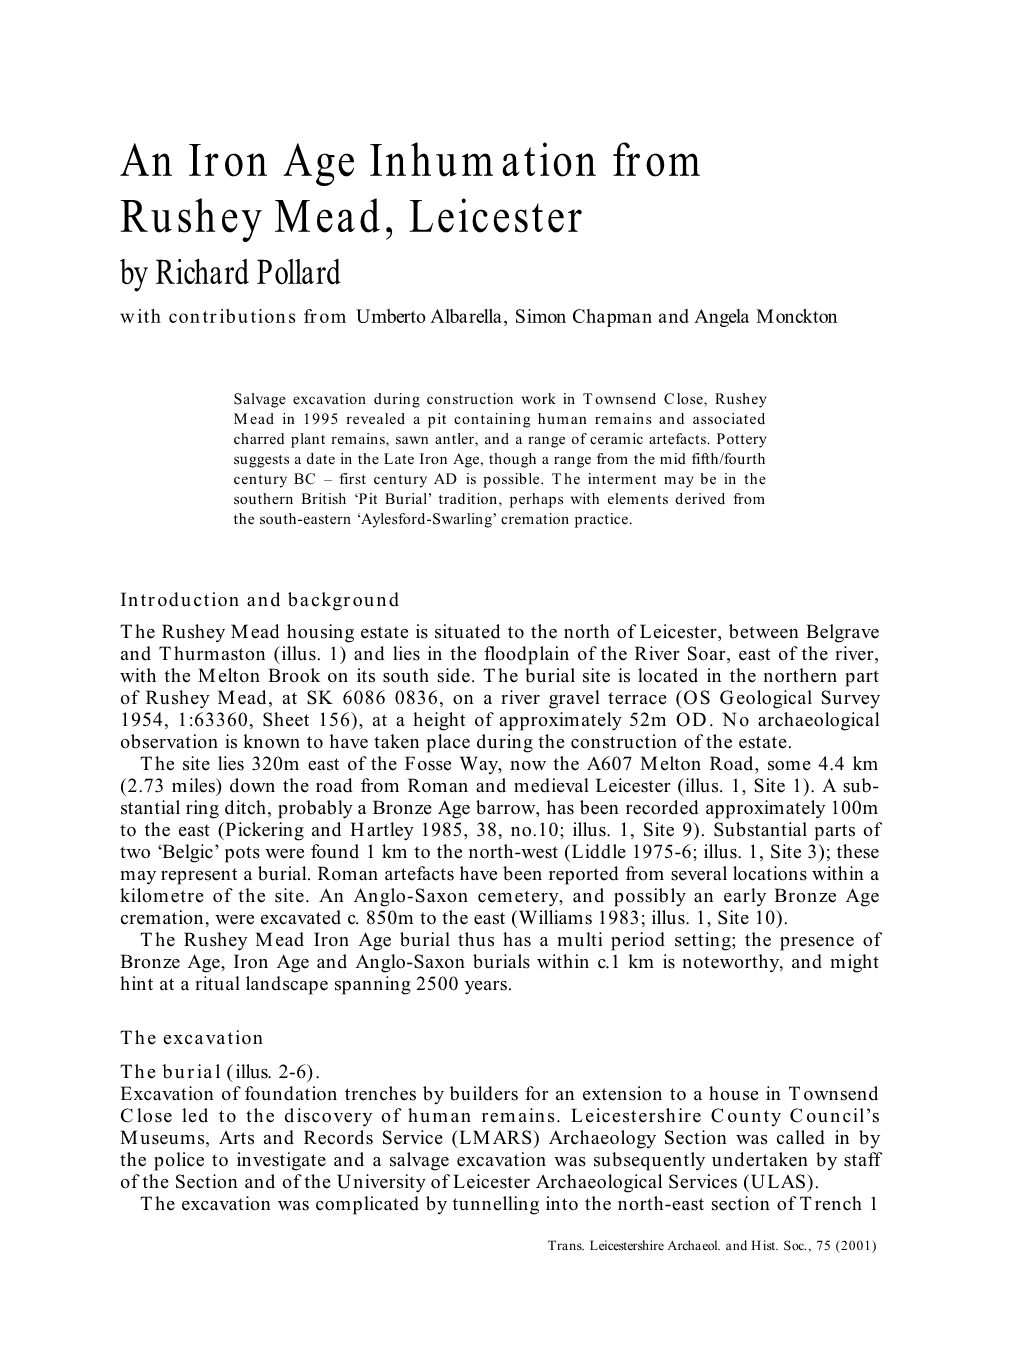 An Iron Age Inhumation from Rushey Mead, Leicester by Richard Pollard with Contributions from Umberto Albarella, Simon Chapman and Angela Monckton